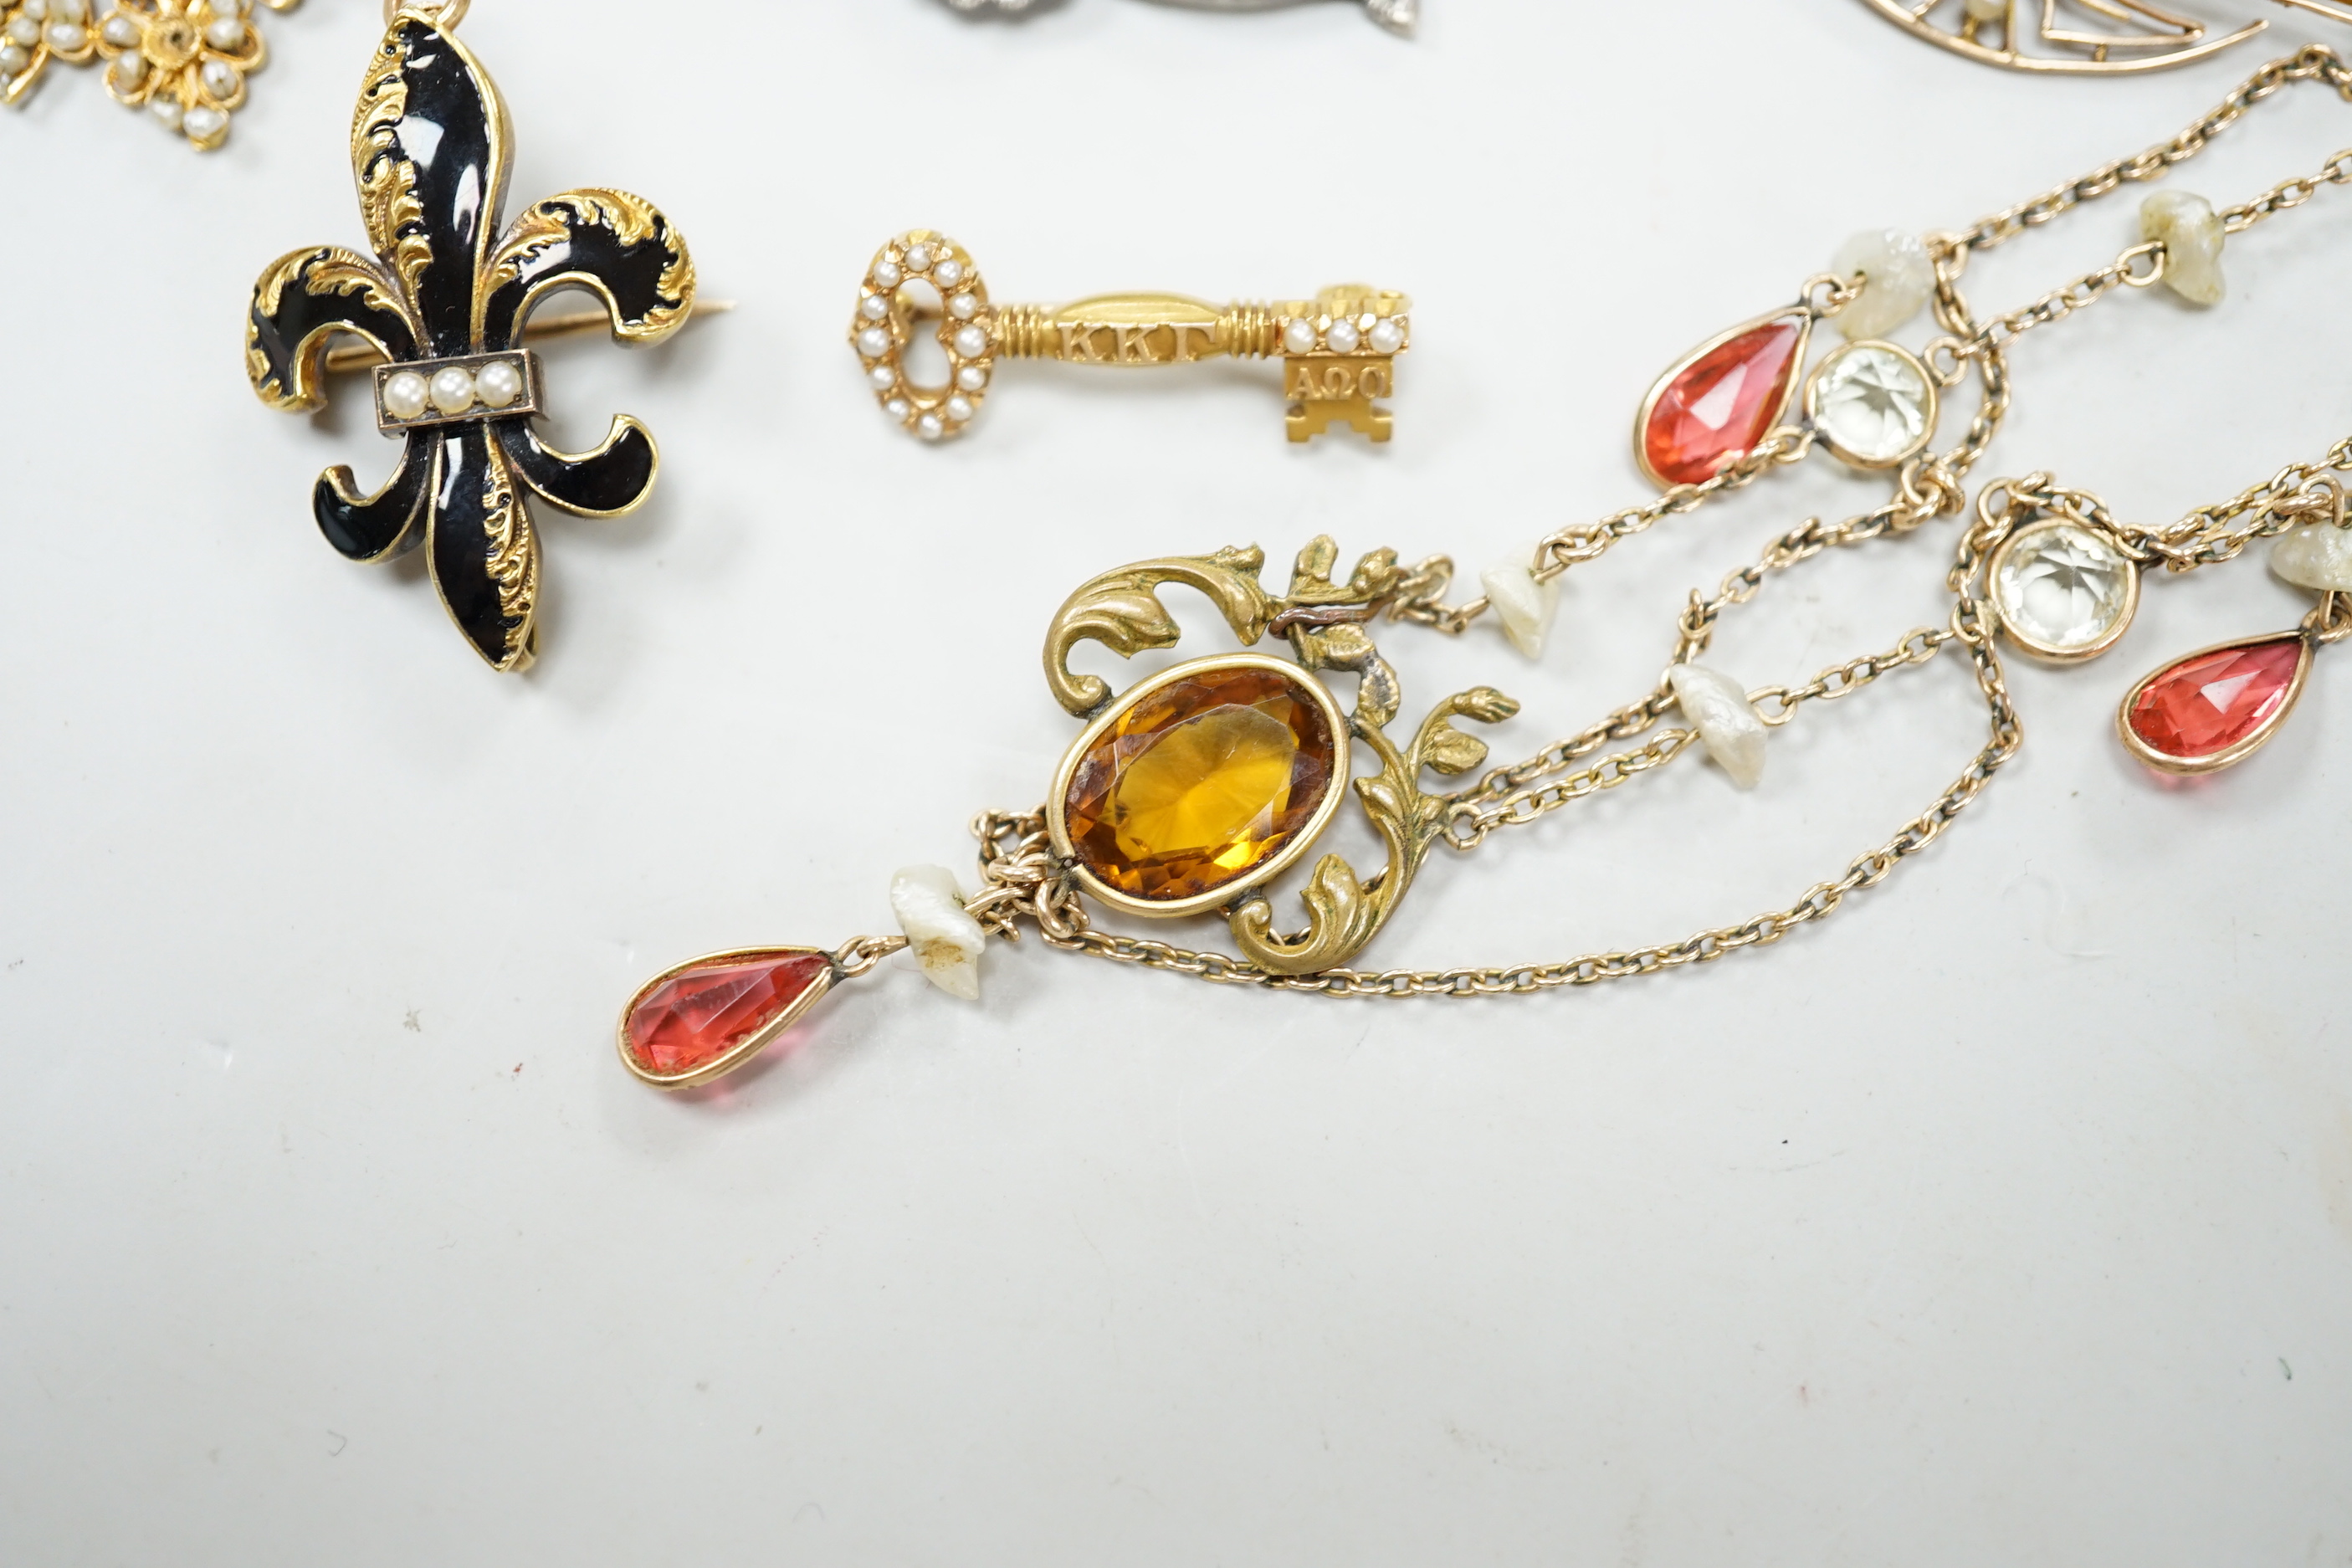 A small group of antique and later jewellery, including 9ct gold and bloodstone fob seal, a 1930's yellow metal and seed pearl set key brooch, 14k and black enamel brooch, spinning fob pendant, coral hand charm, 10k and